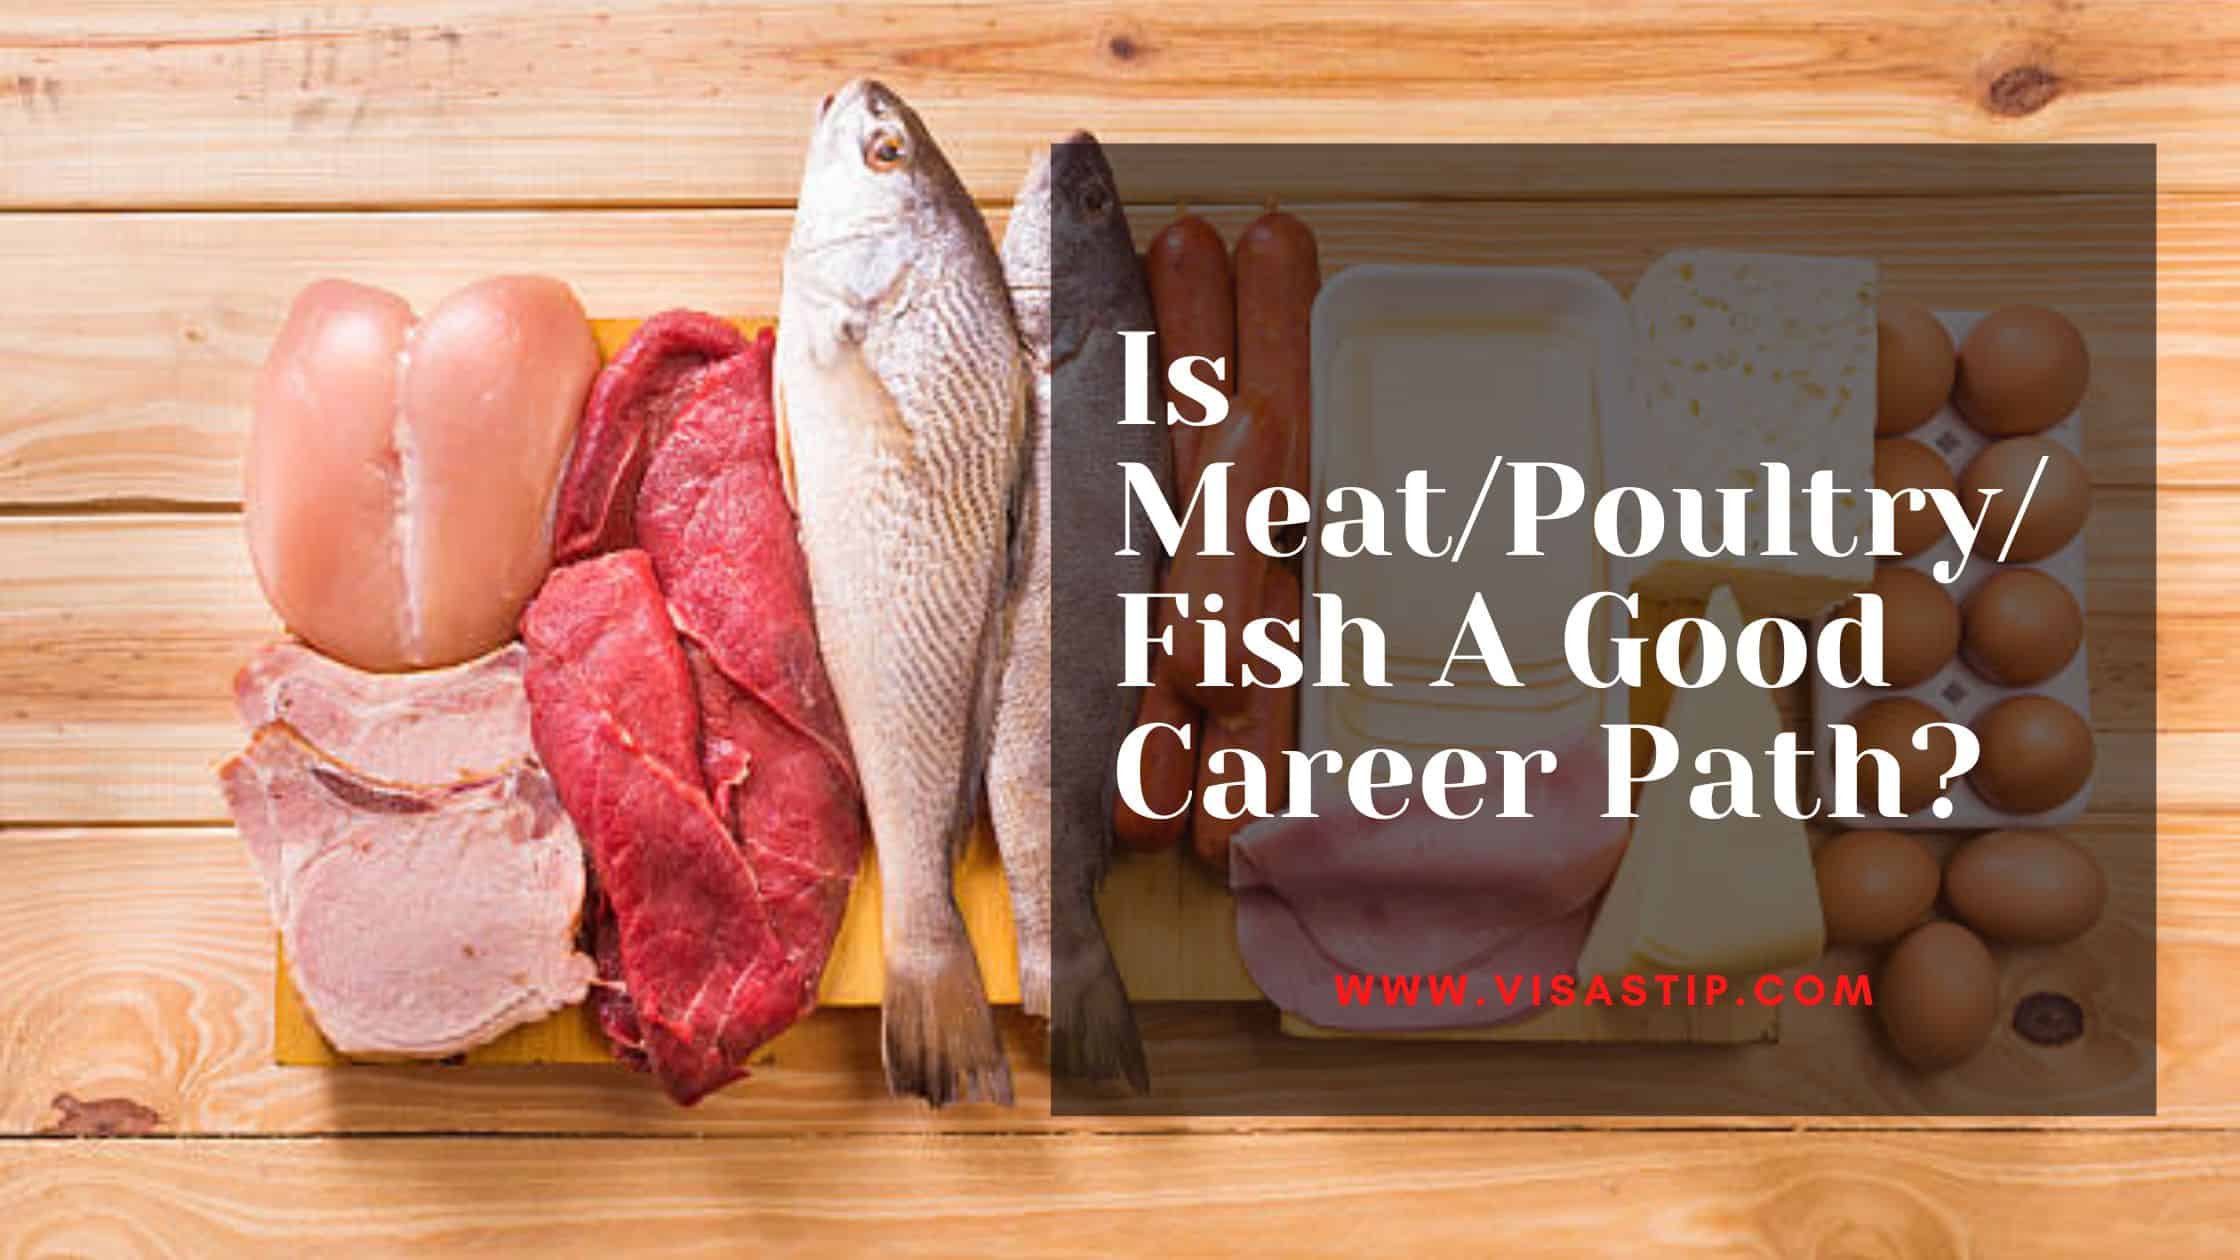 Is Meat/Poultry/Fish A Good Career Path?